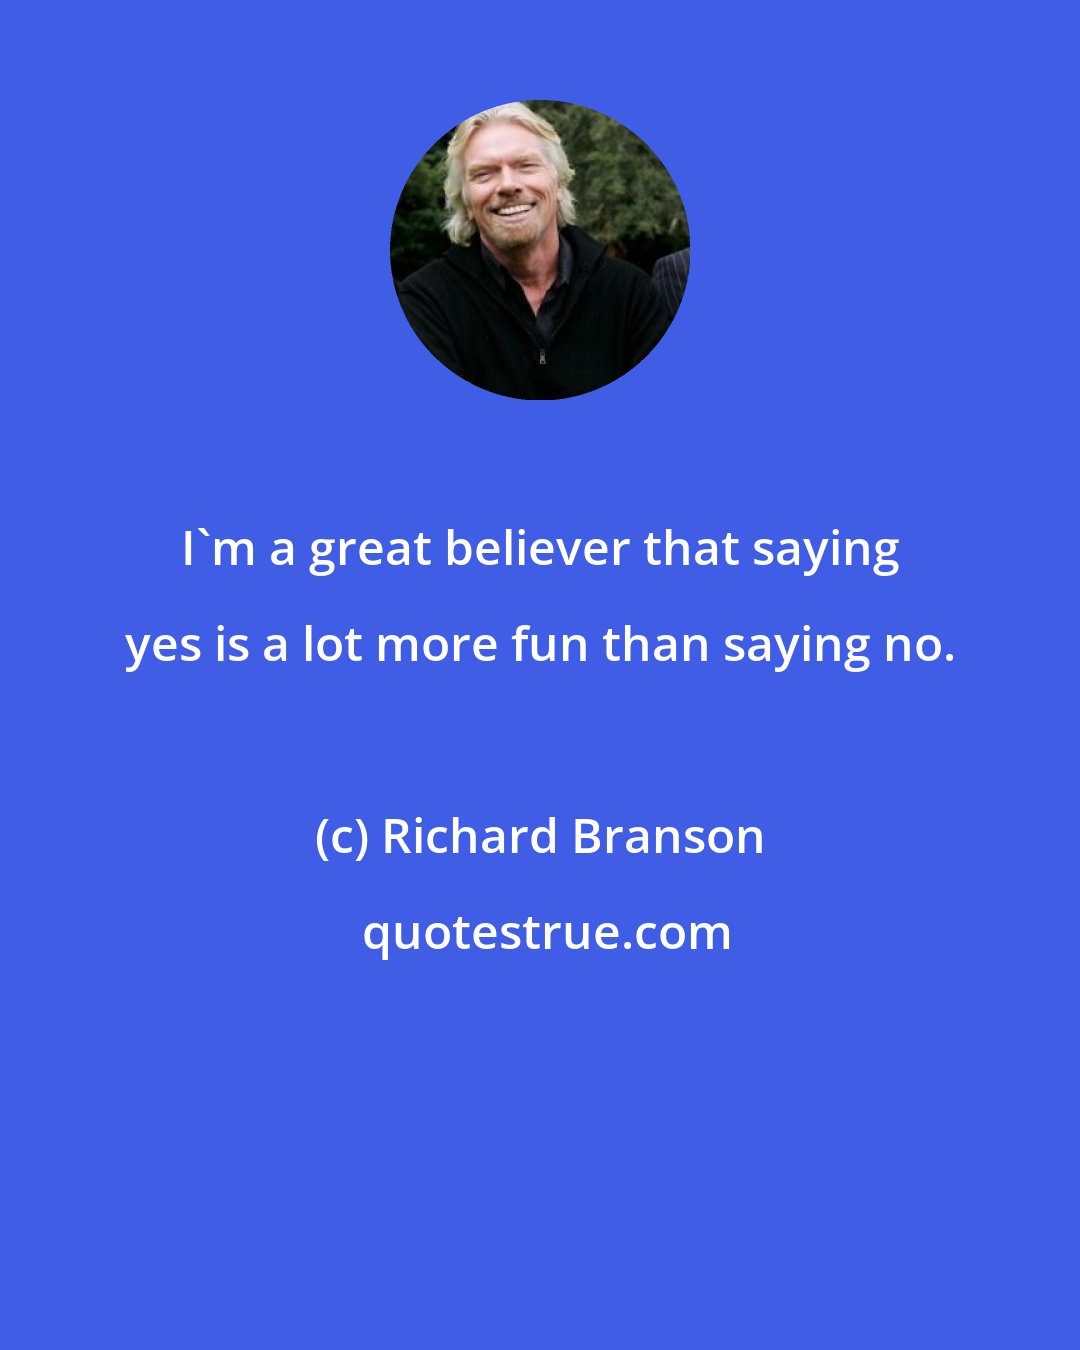 Richard Branson: I'm a great believer that saying yes is a lot more fun than saying no.